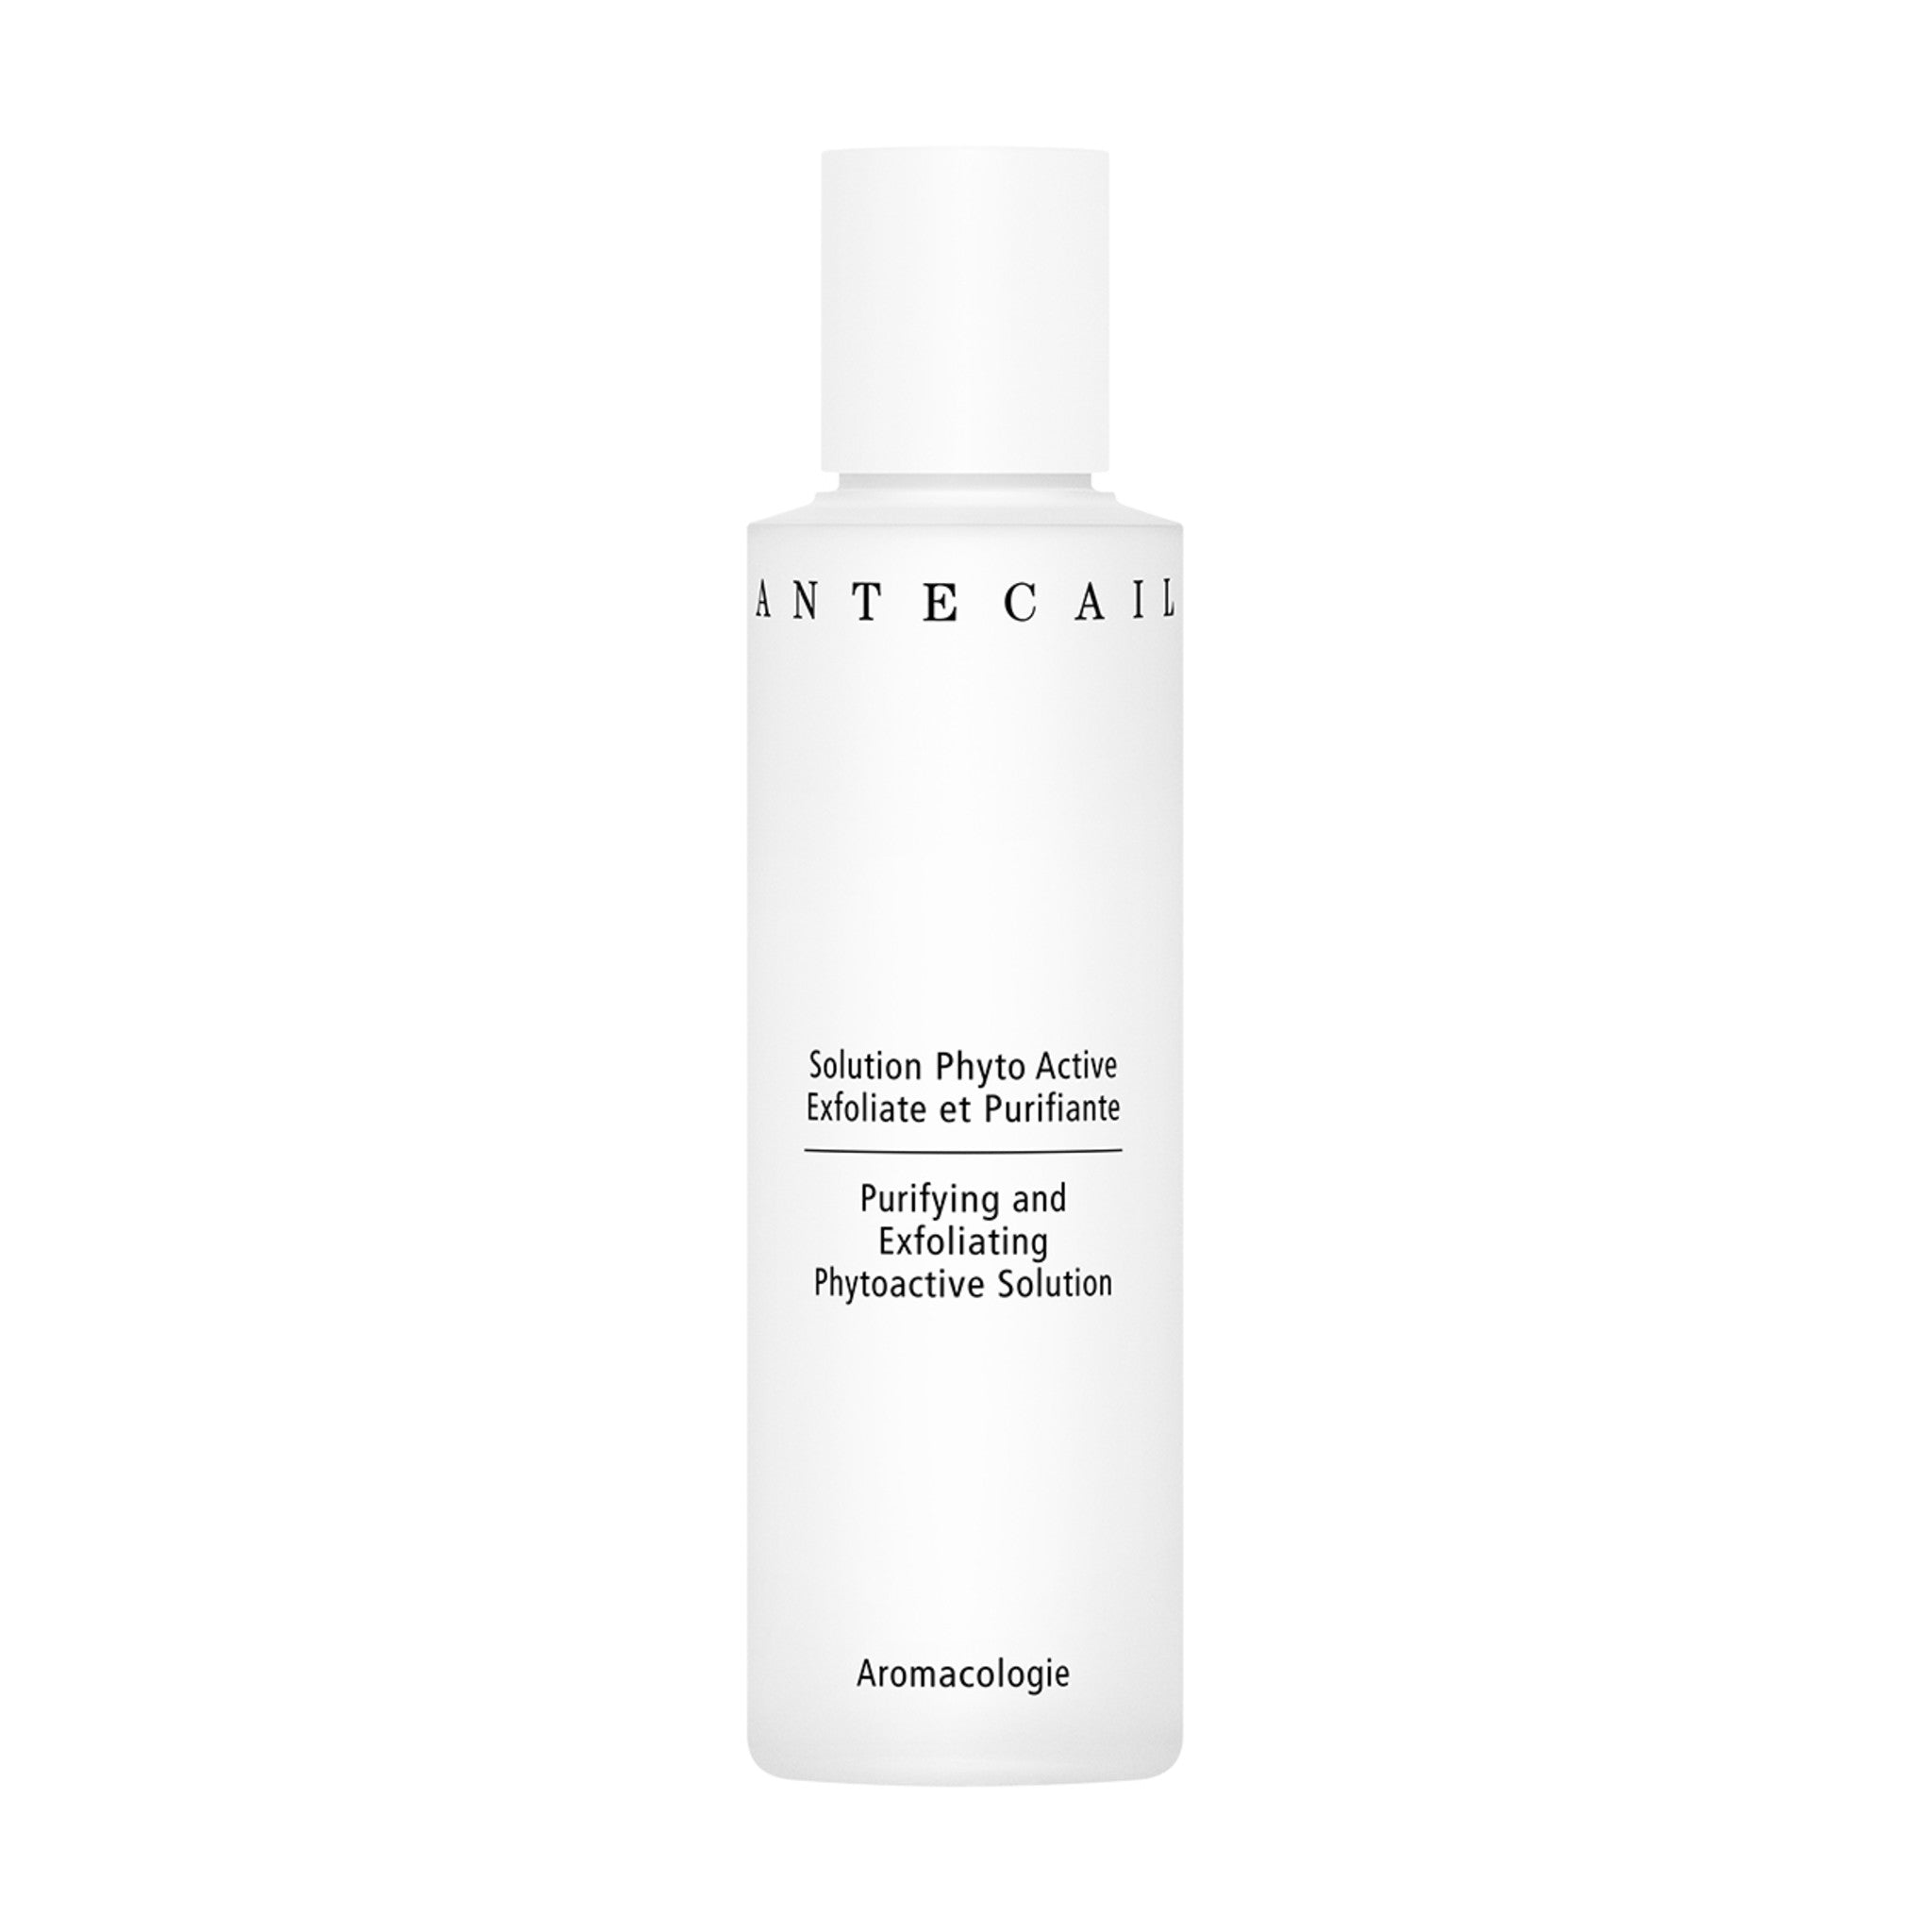 Chantecaille Purifying and Exfoliating Phytoactive Solution main image.